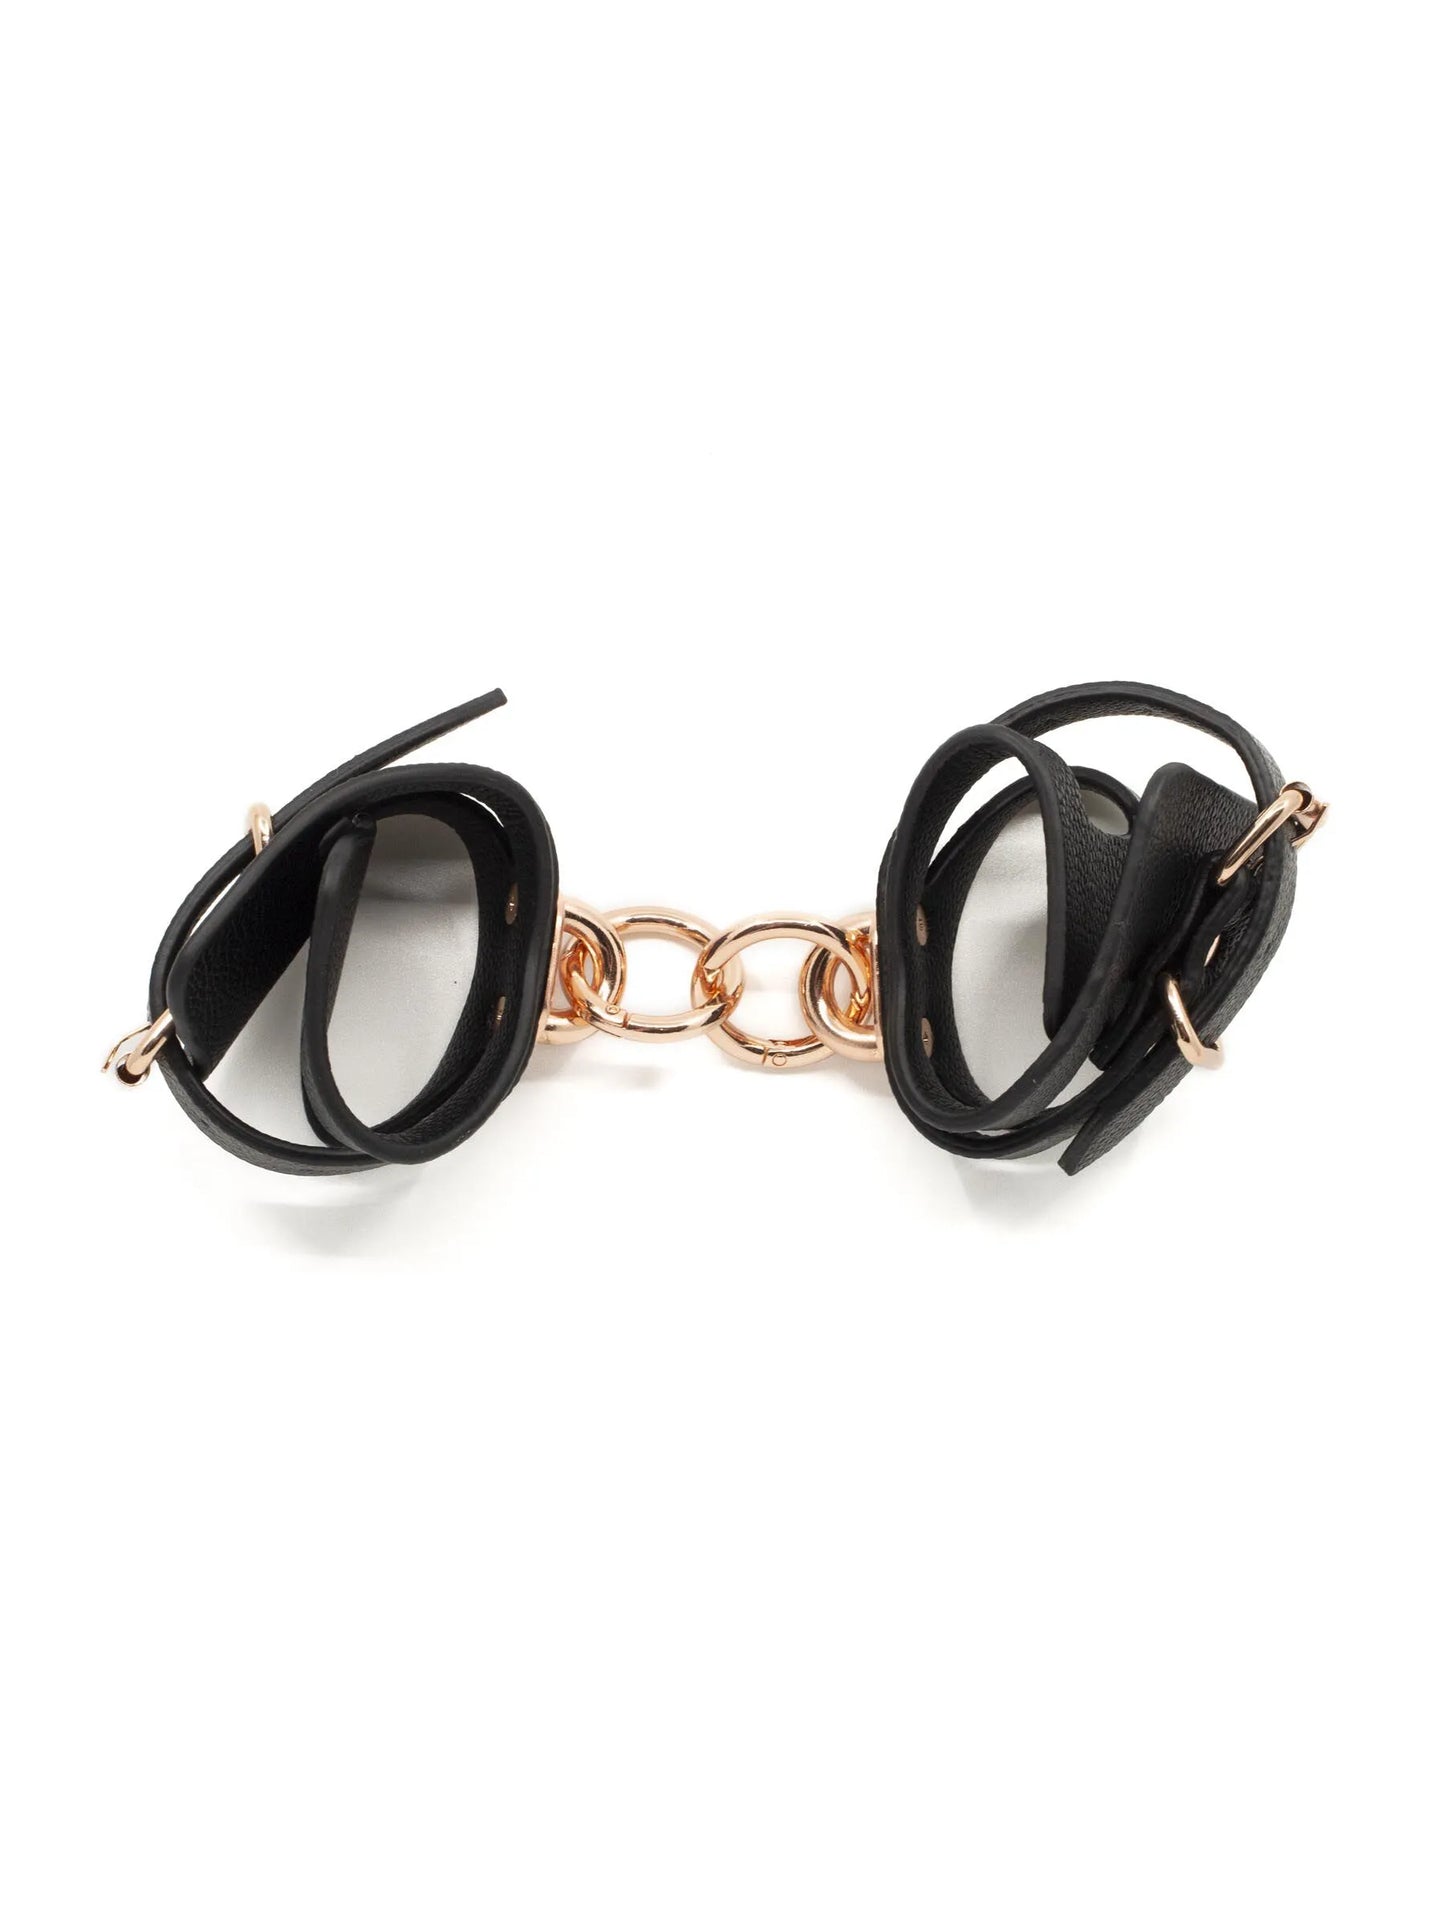 Signature Faux Leather Buckle Handcuffs From Ann Summers, Image 0